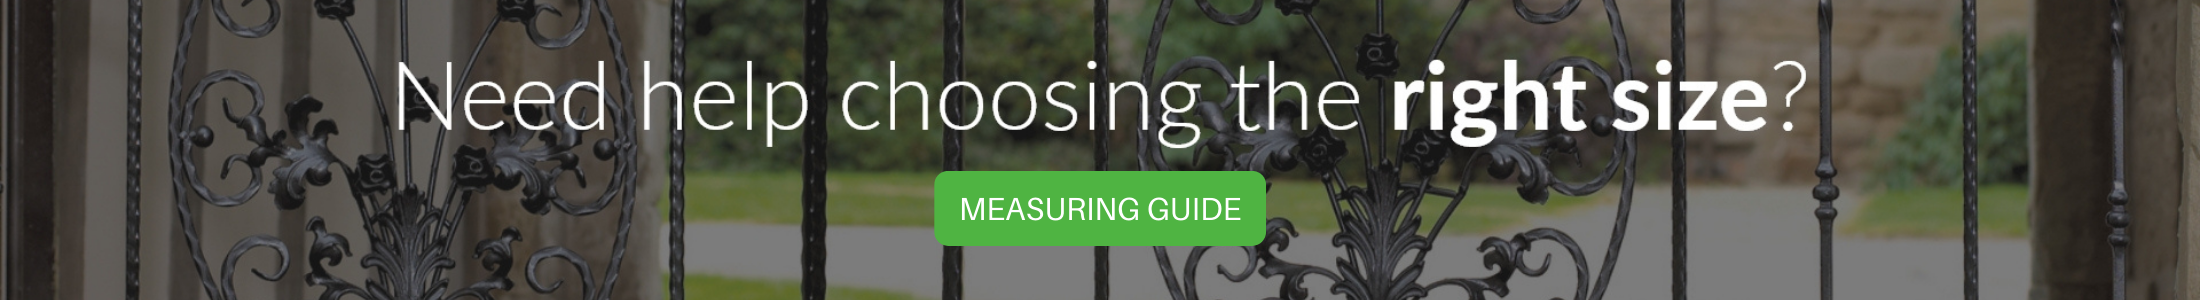 View the Saxon railings measuring guide - Click here